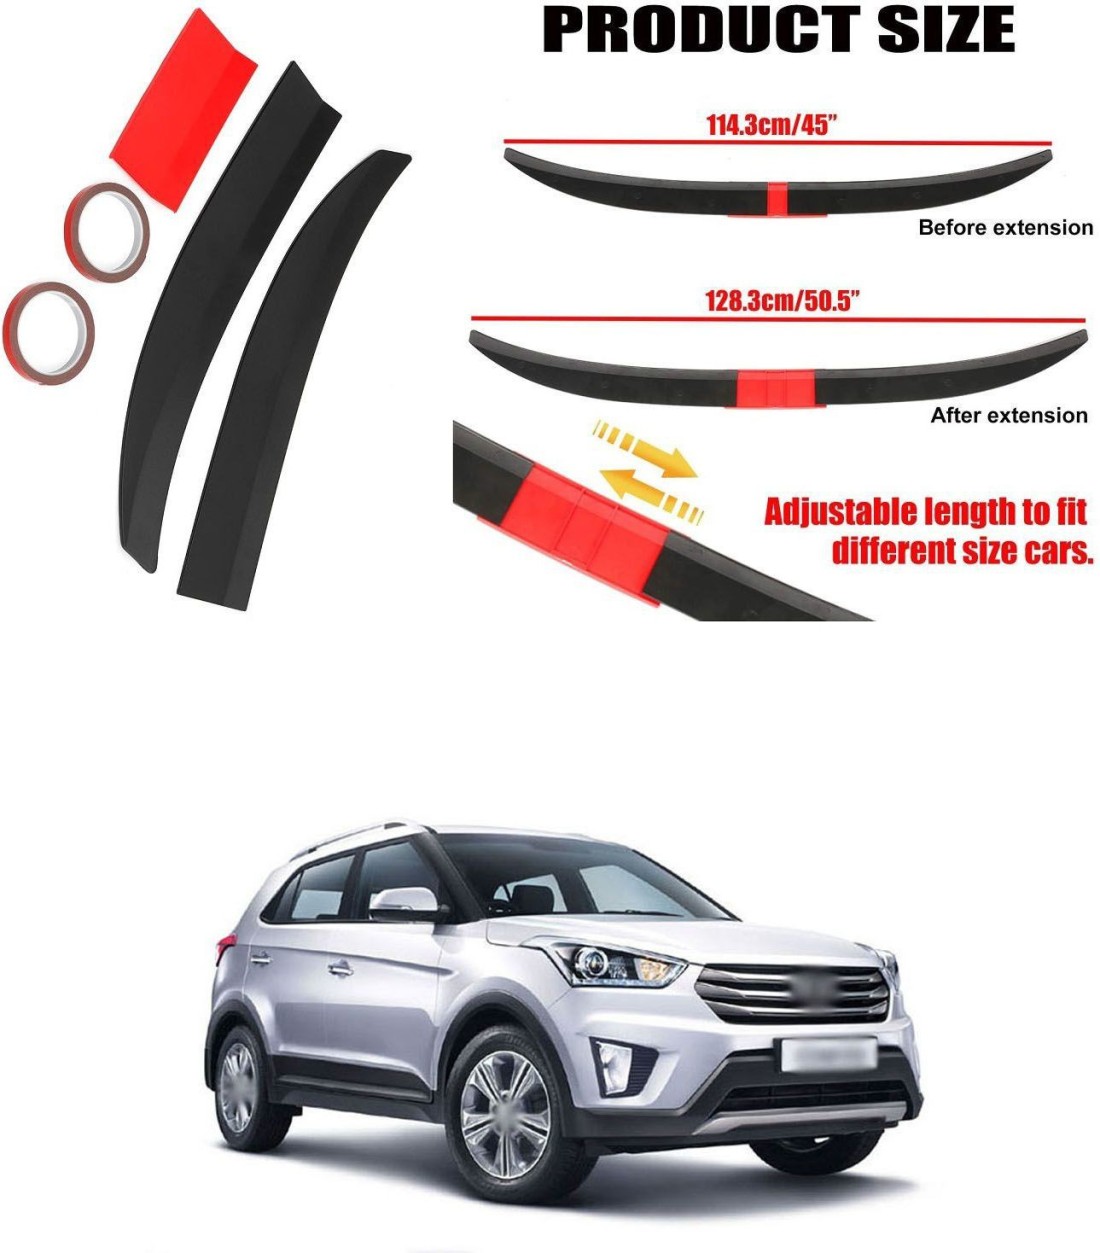 PROEDITION 3PC Universal Car Modified ABS Tail Wing Rear Trunk Spoiler Lip  529 Car Spoiler Price in India - Buy PROEDITION 3PC Universal Car Modified  ABS Tail Wing Rear Trunk Spoiler Lip